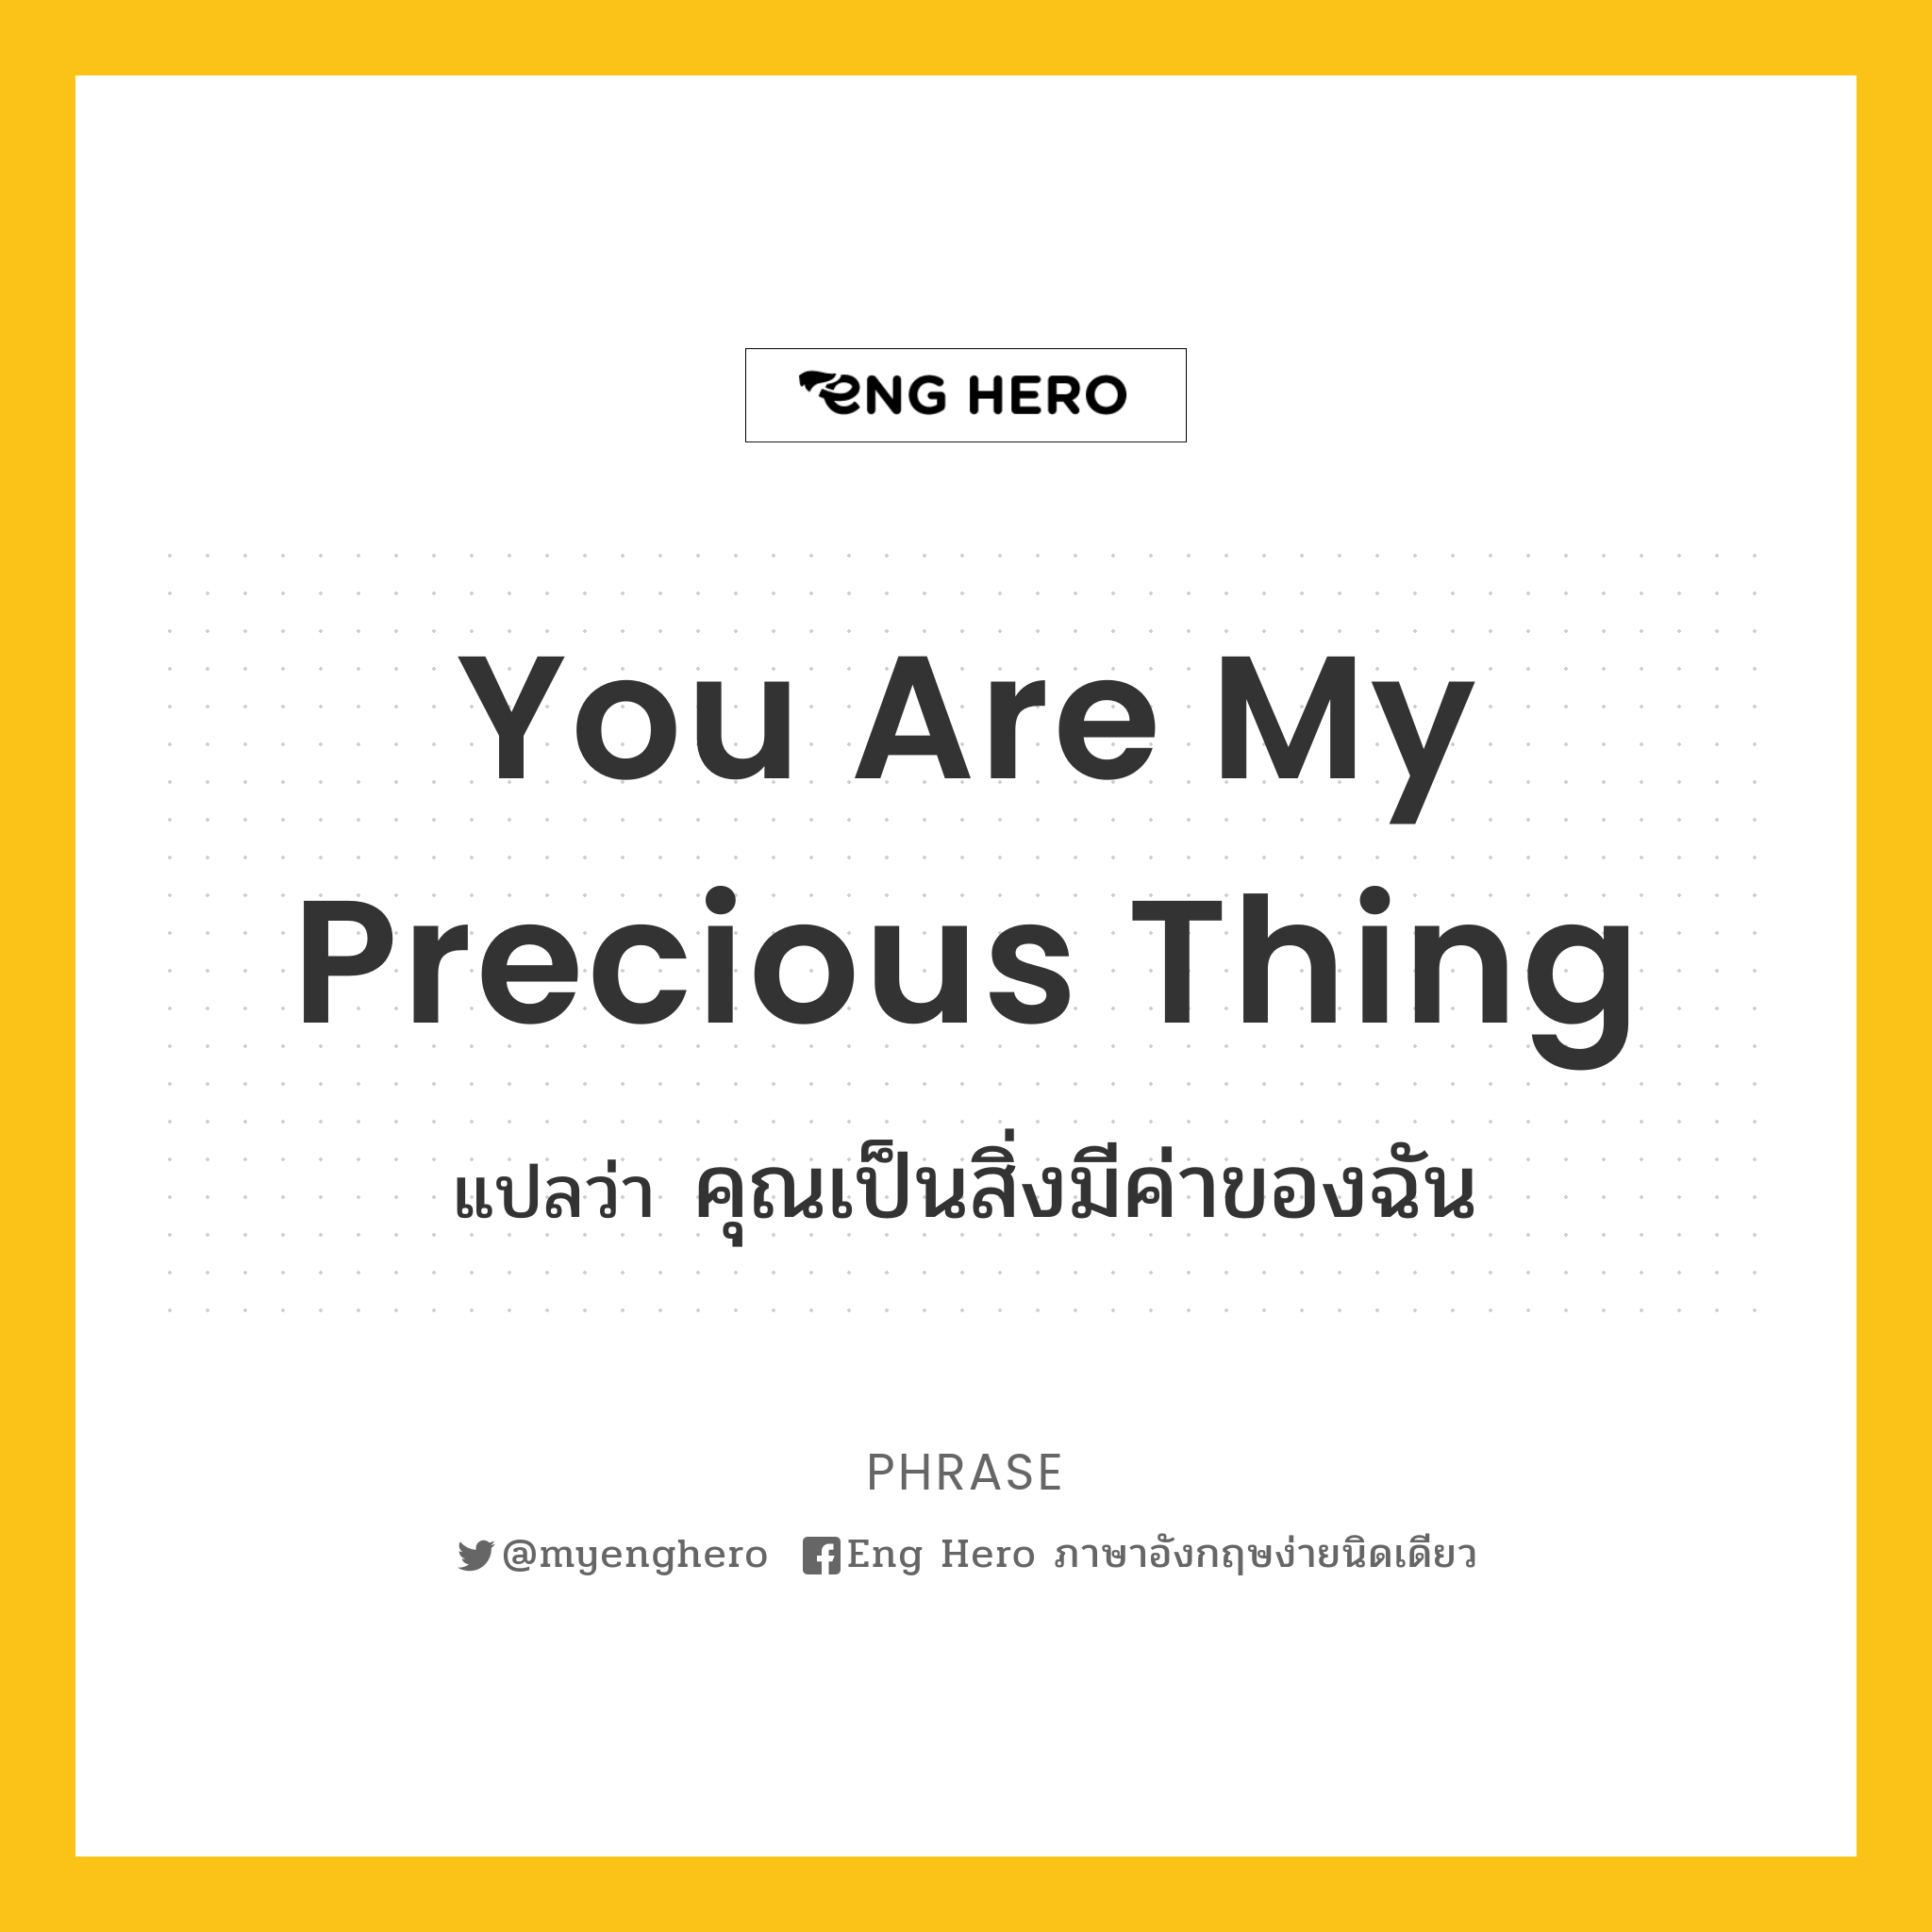 You are my precious thing